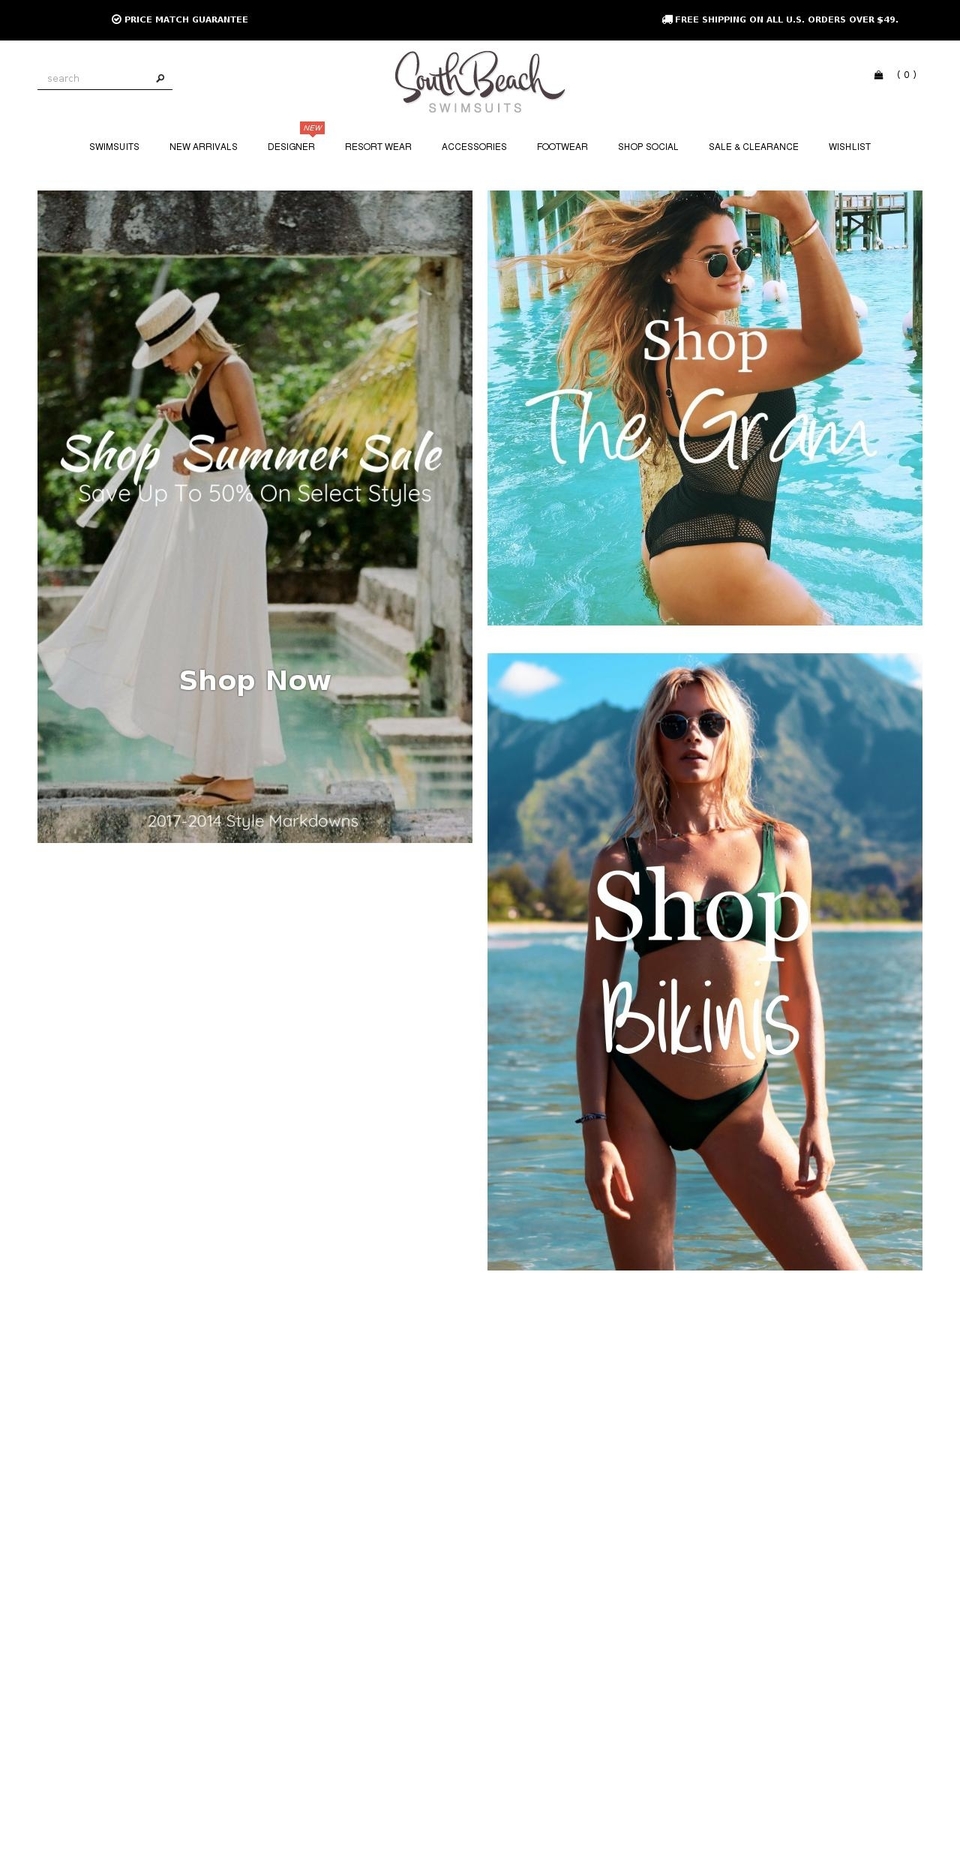 Made With ❤ By Minion Made - Updated Checkout Shopify theme site example saleswimwear.com